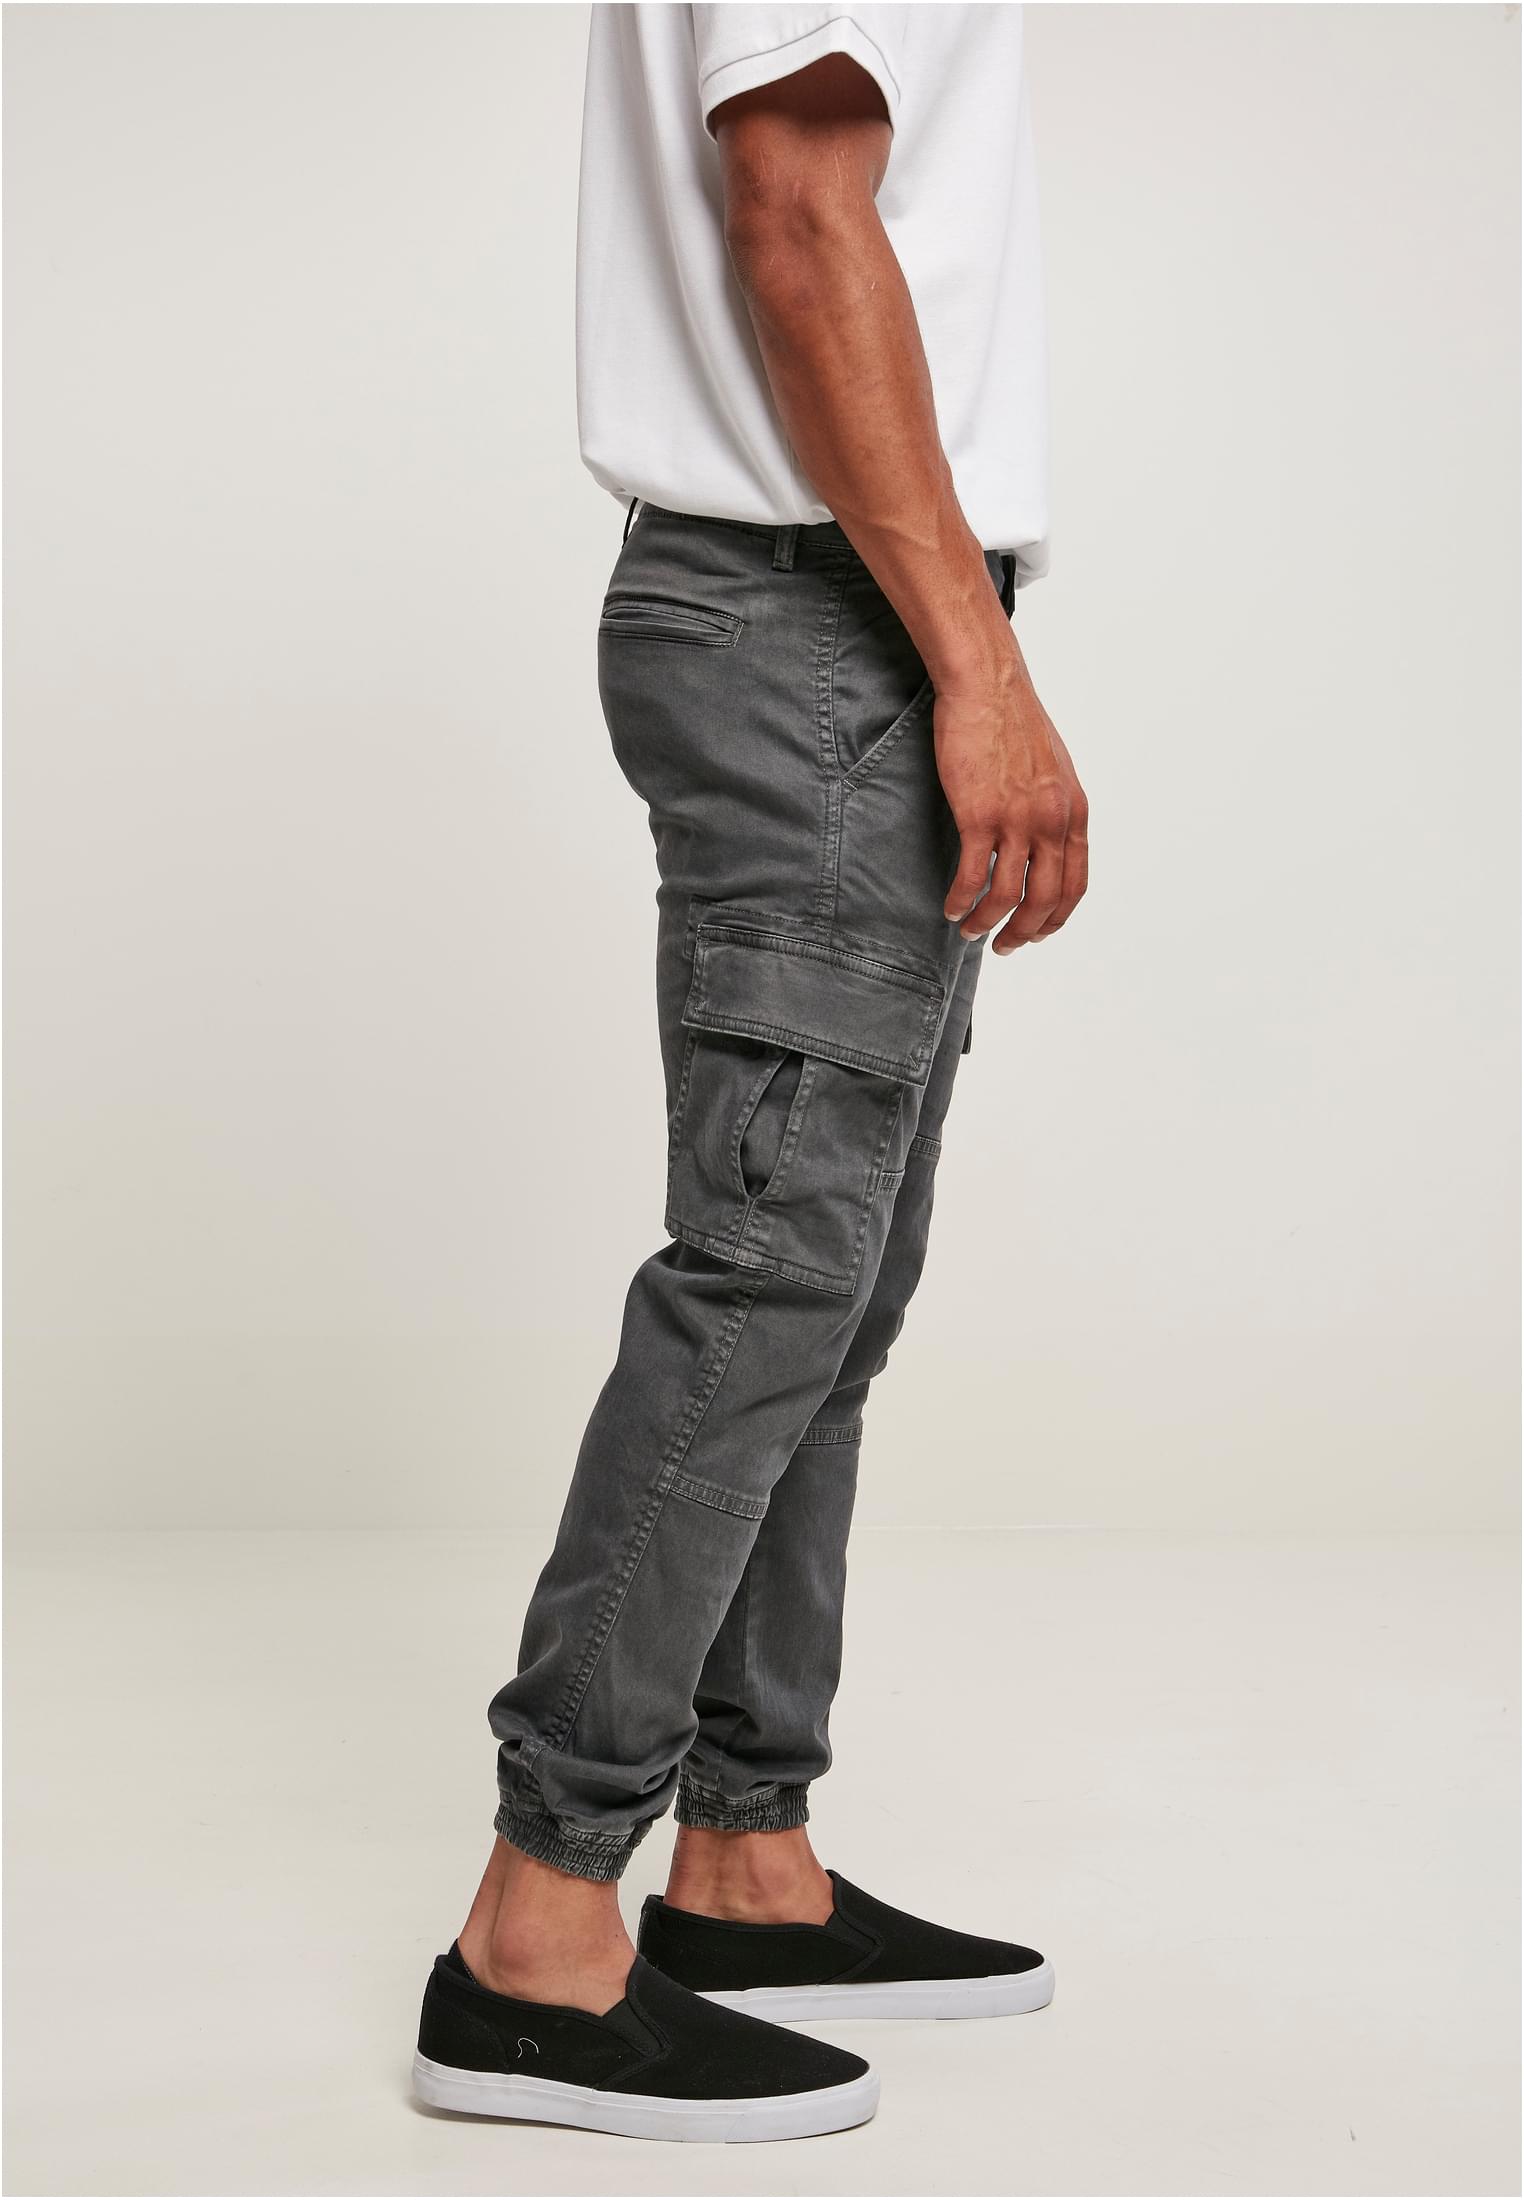 Sweatpants Washed Cargo Twill Jogging Pants in Farbe darkshadow